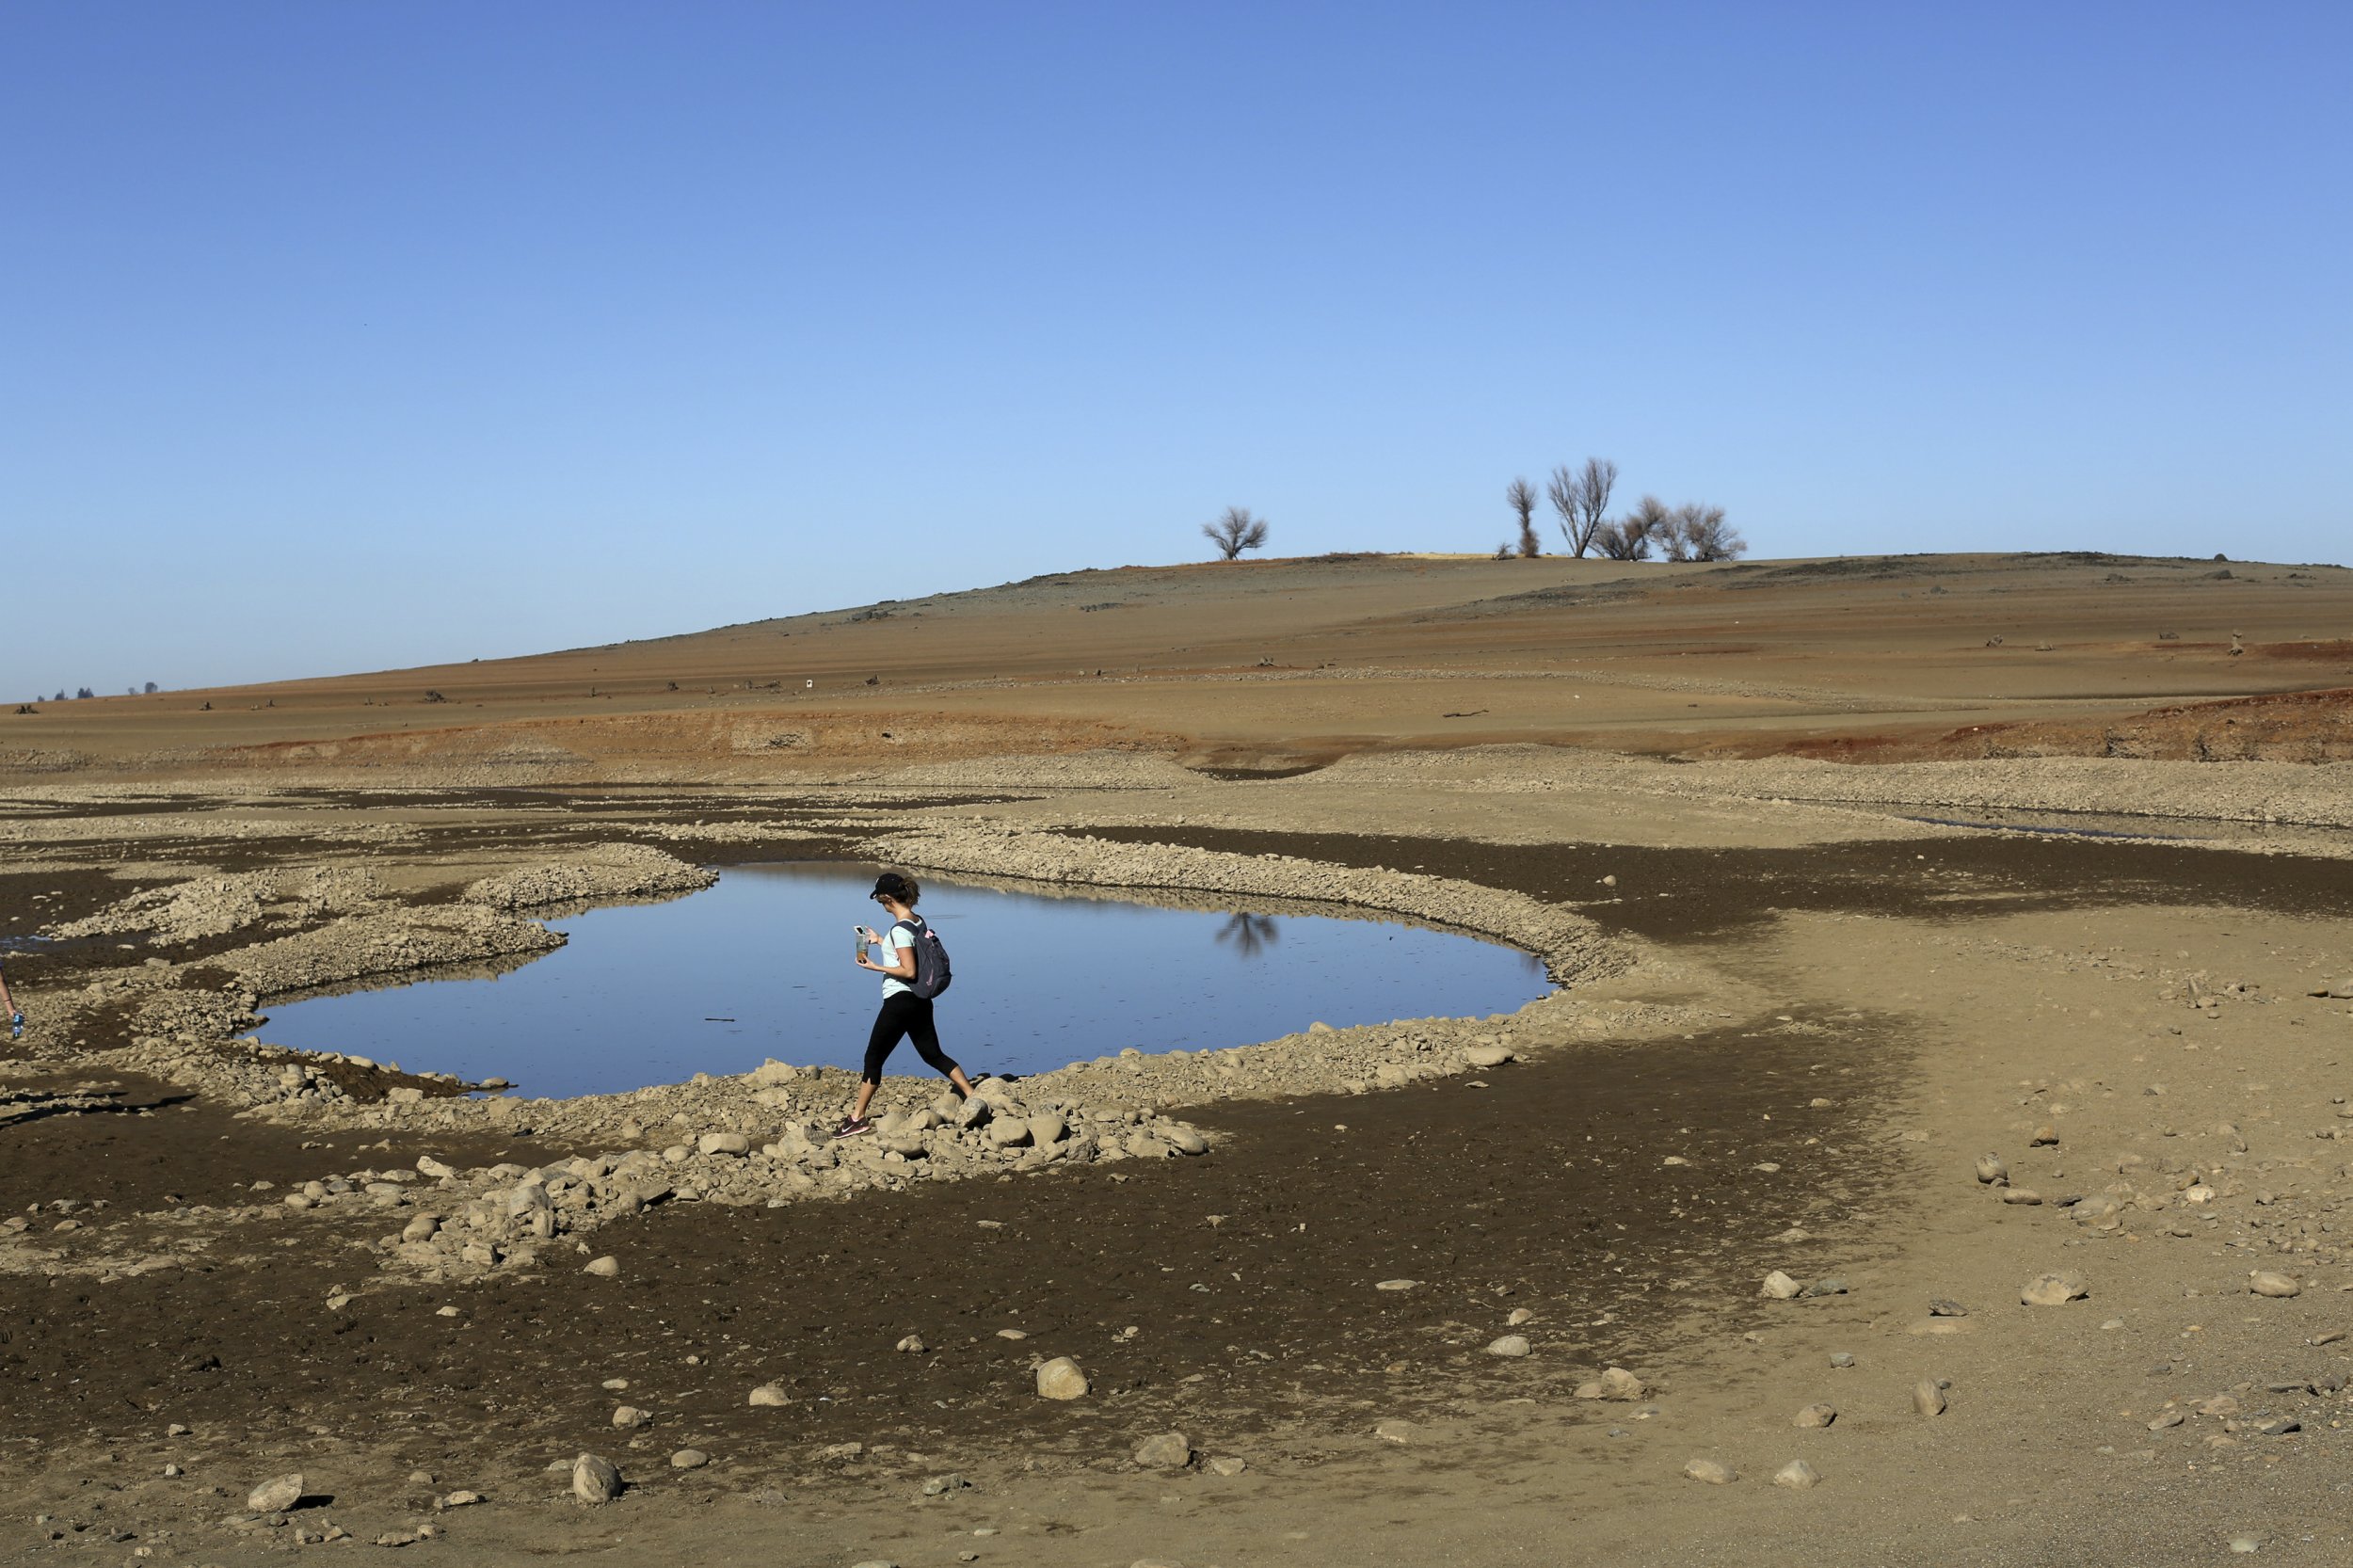 California Water Board Launches New Water Shortage Regulations As